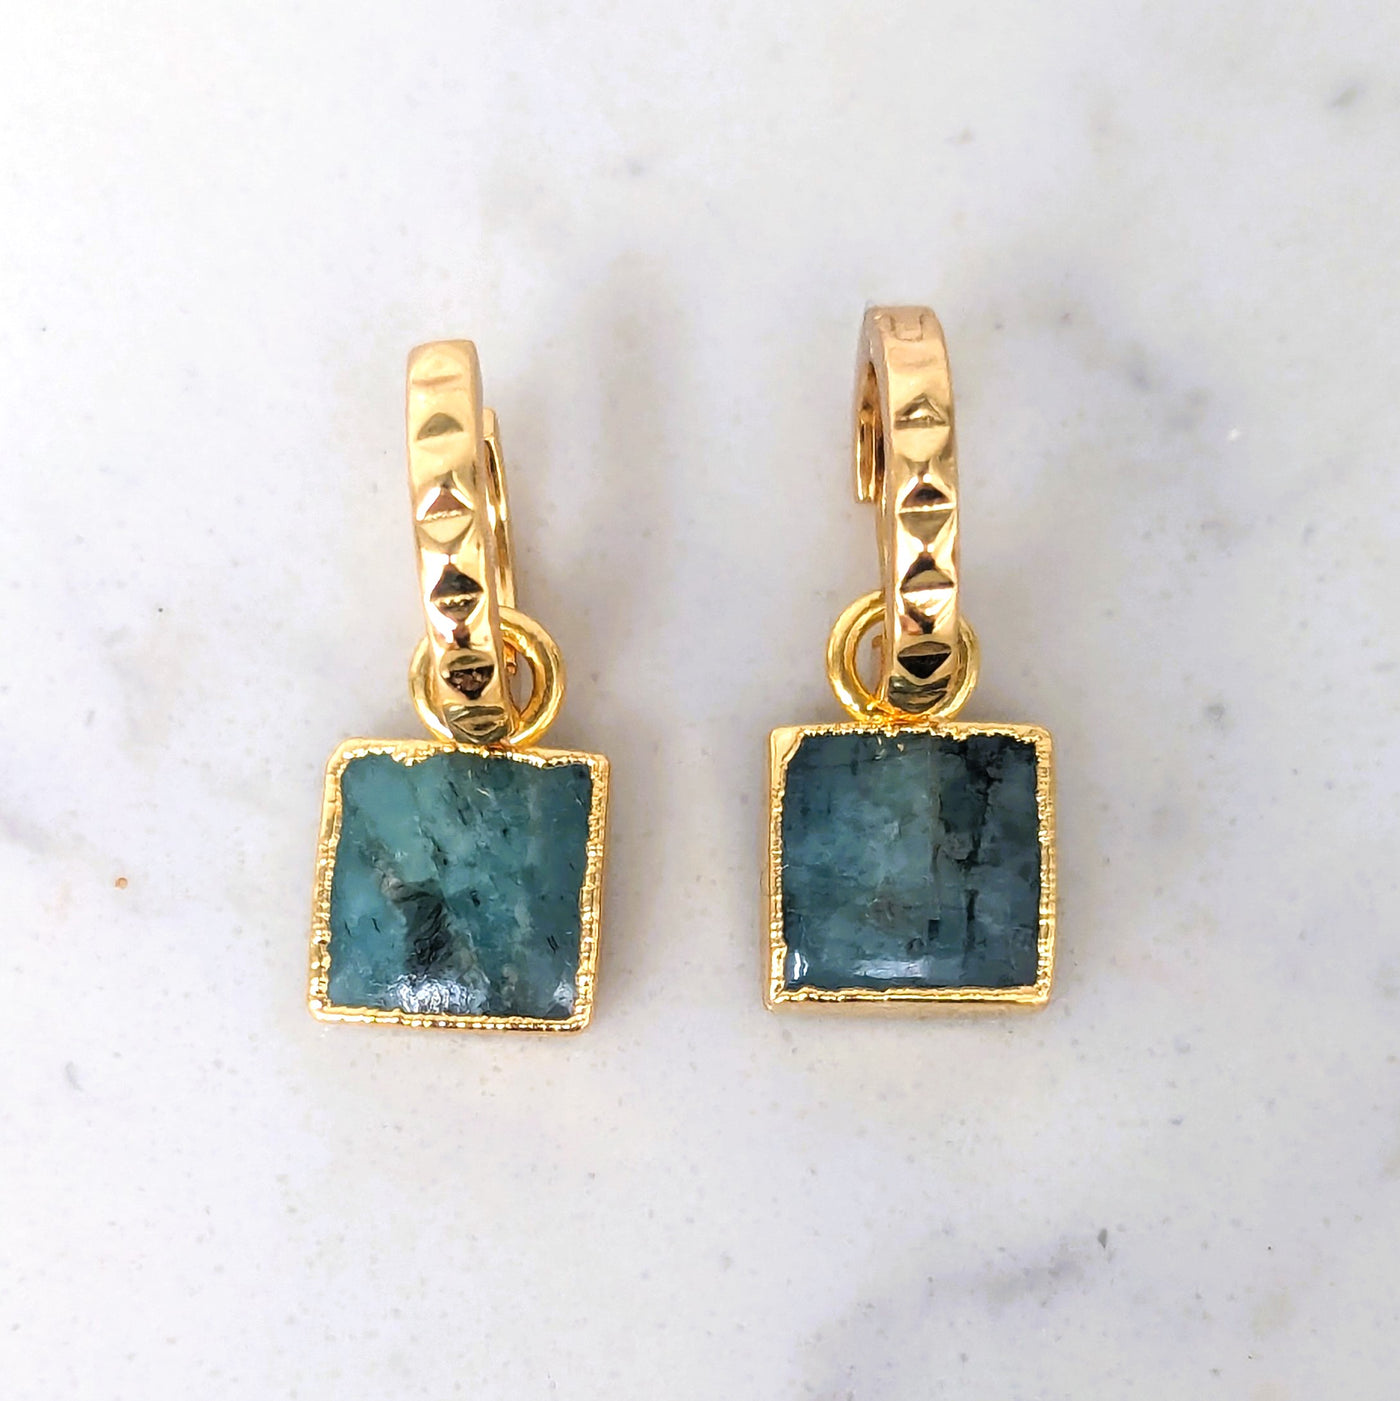 Gold plated square charm emerald earrings